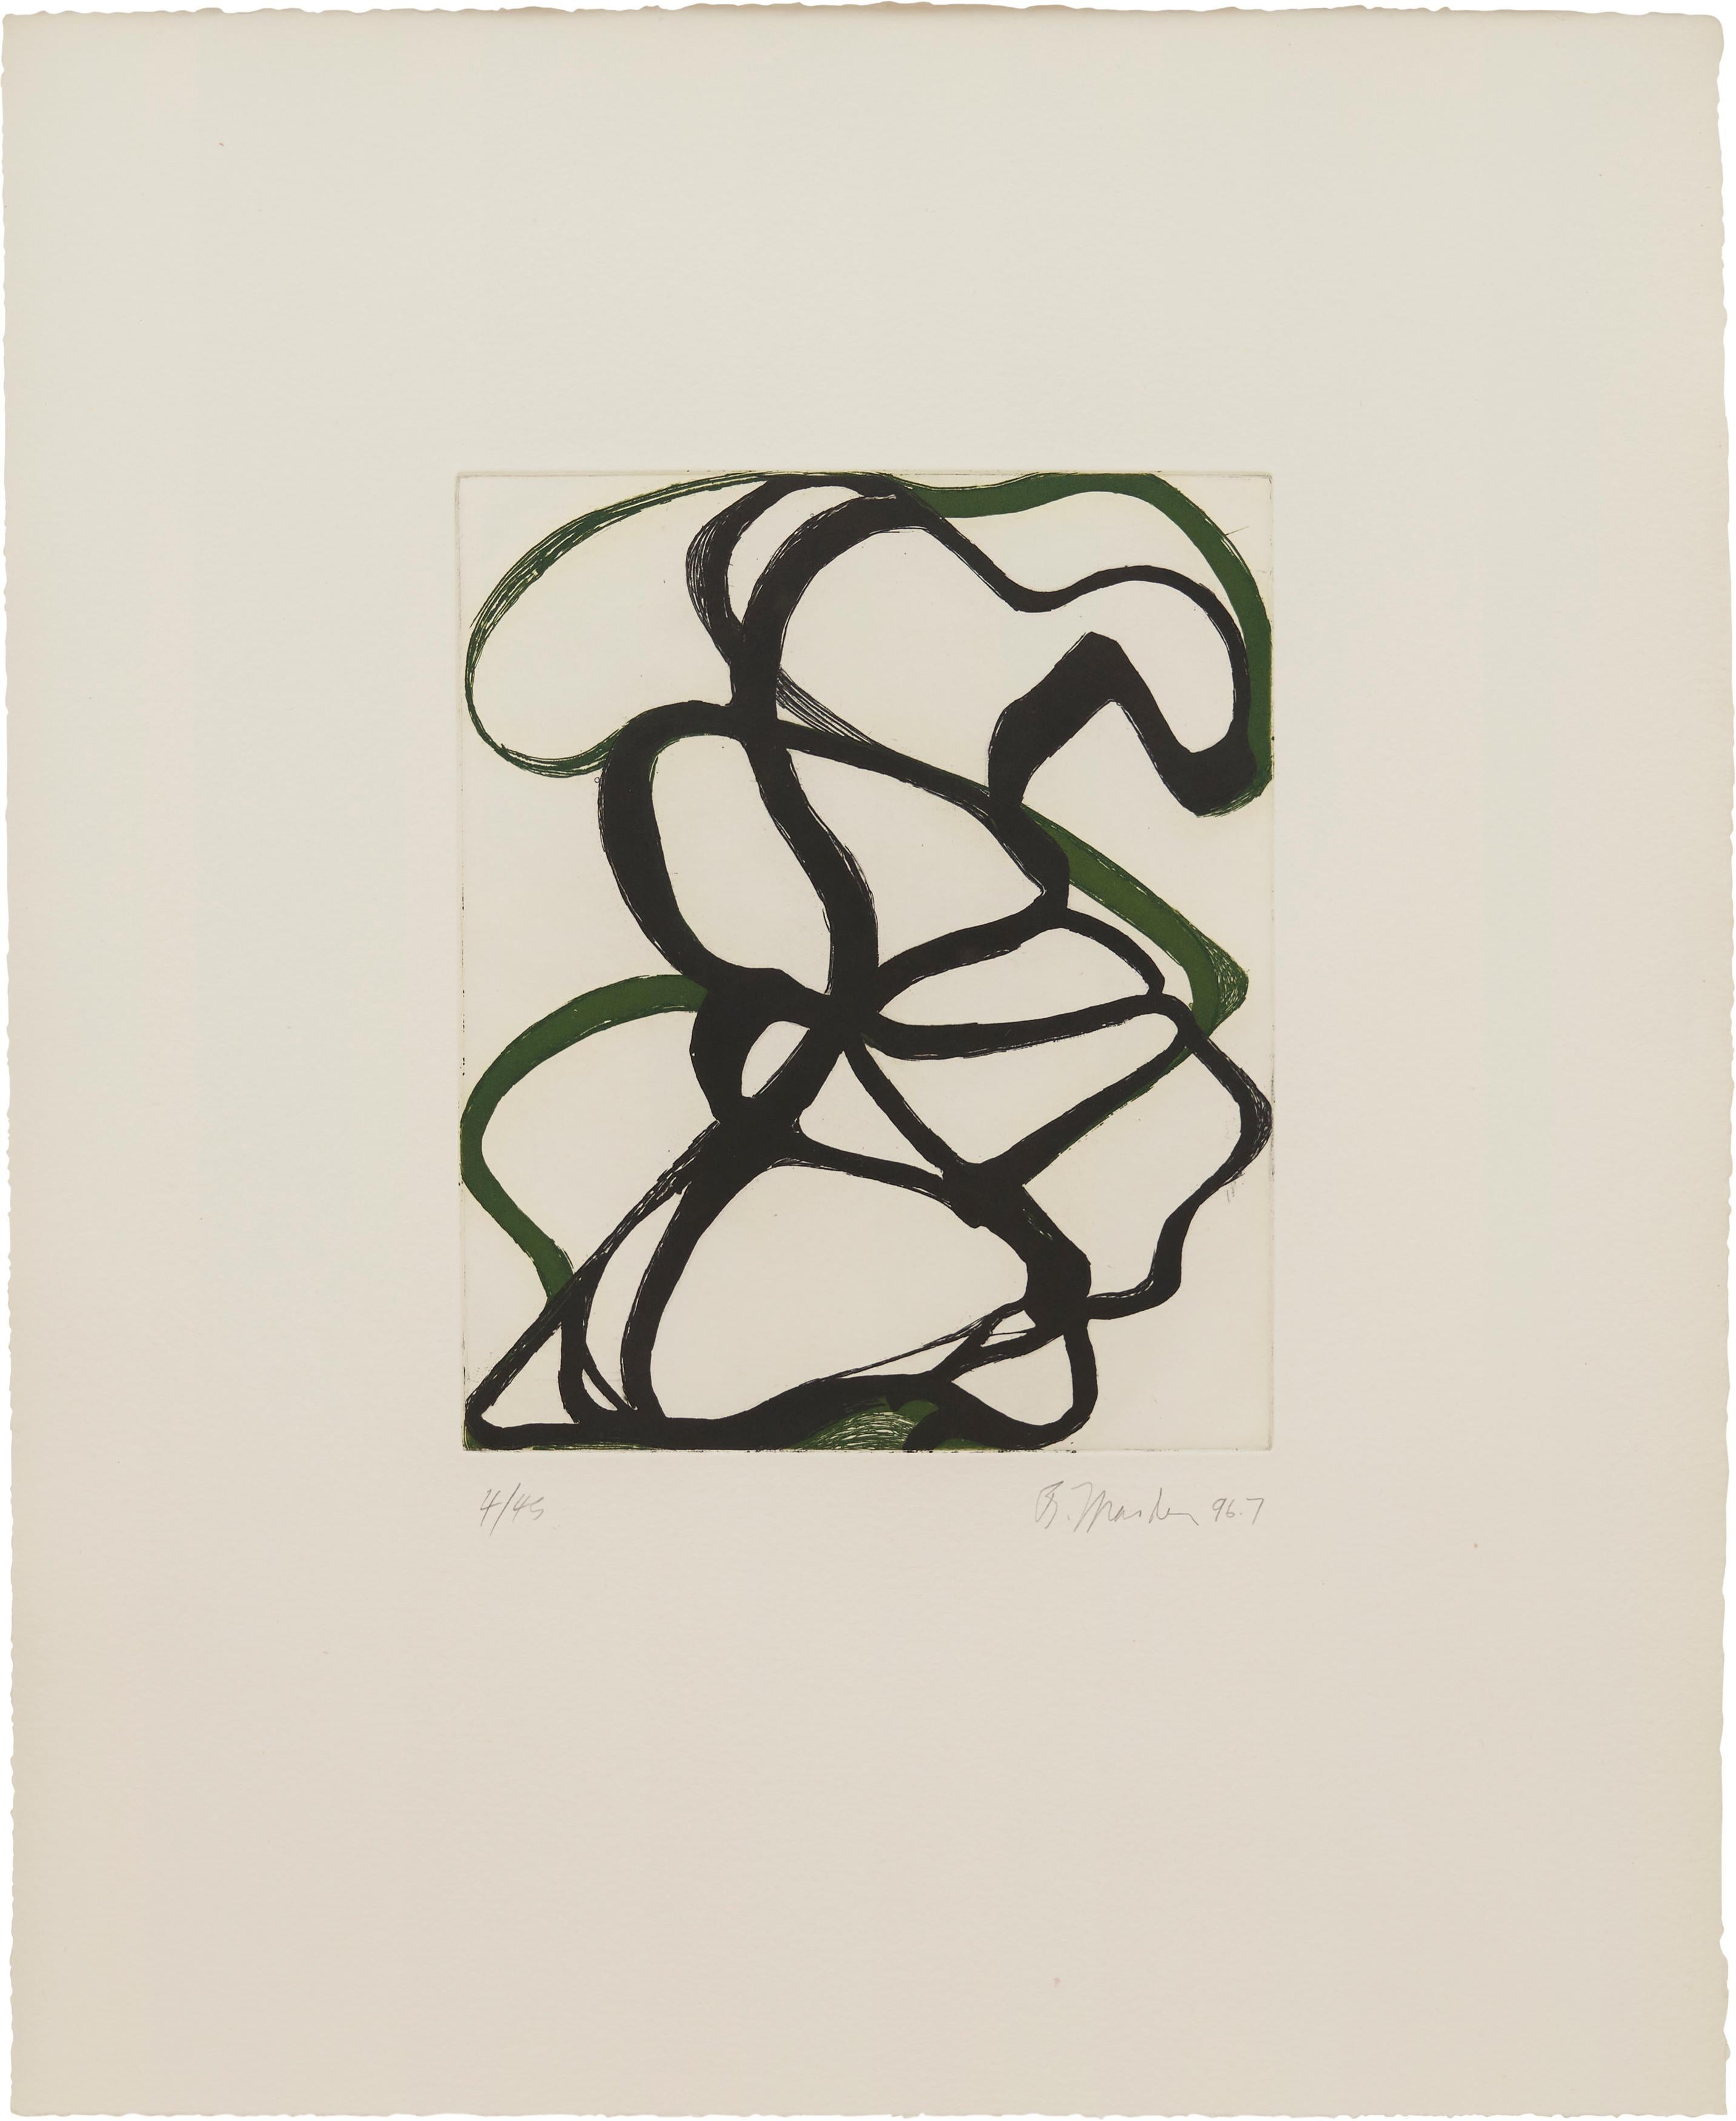 Brice Marden Abstract Print - The Fungoid Rock